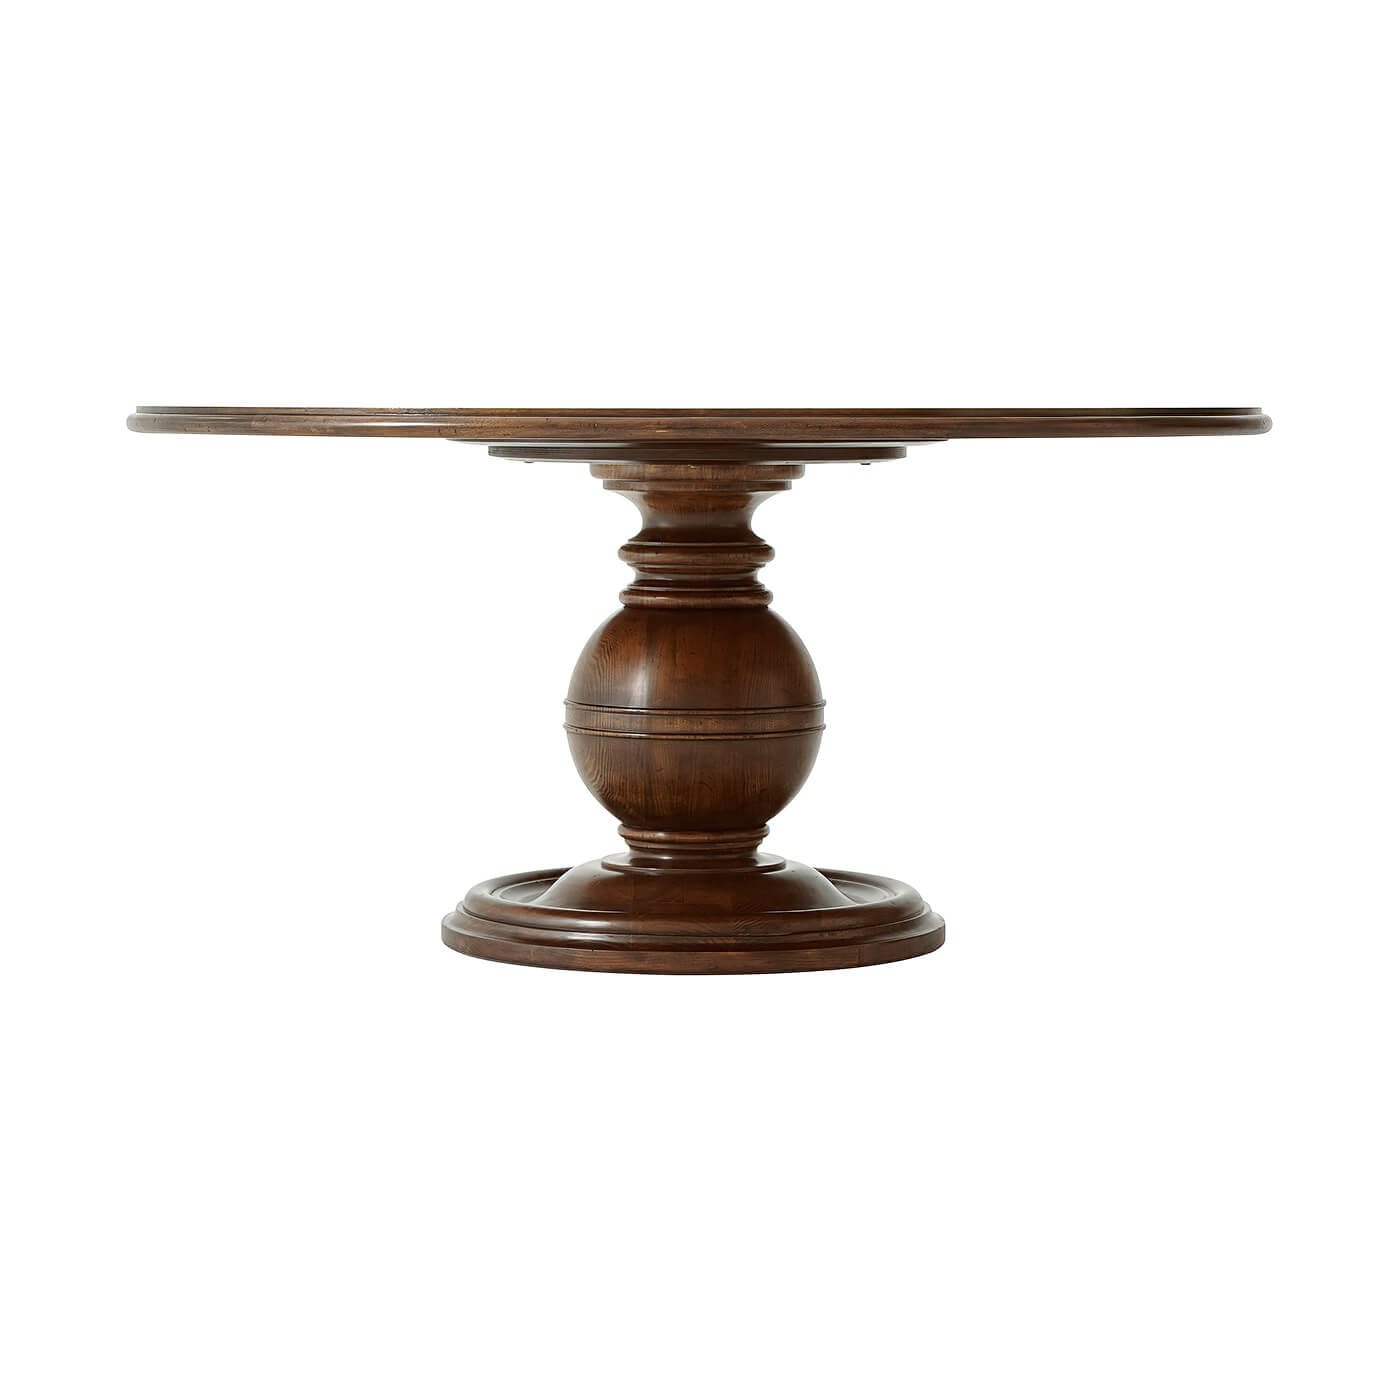 French Art Deco Style Dining Table - English Georgian America